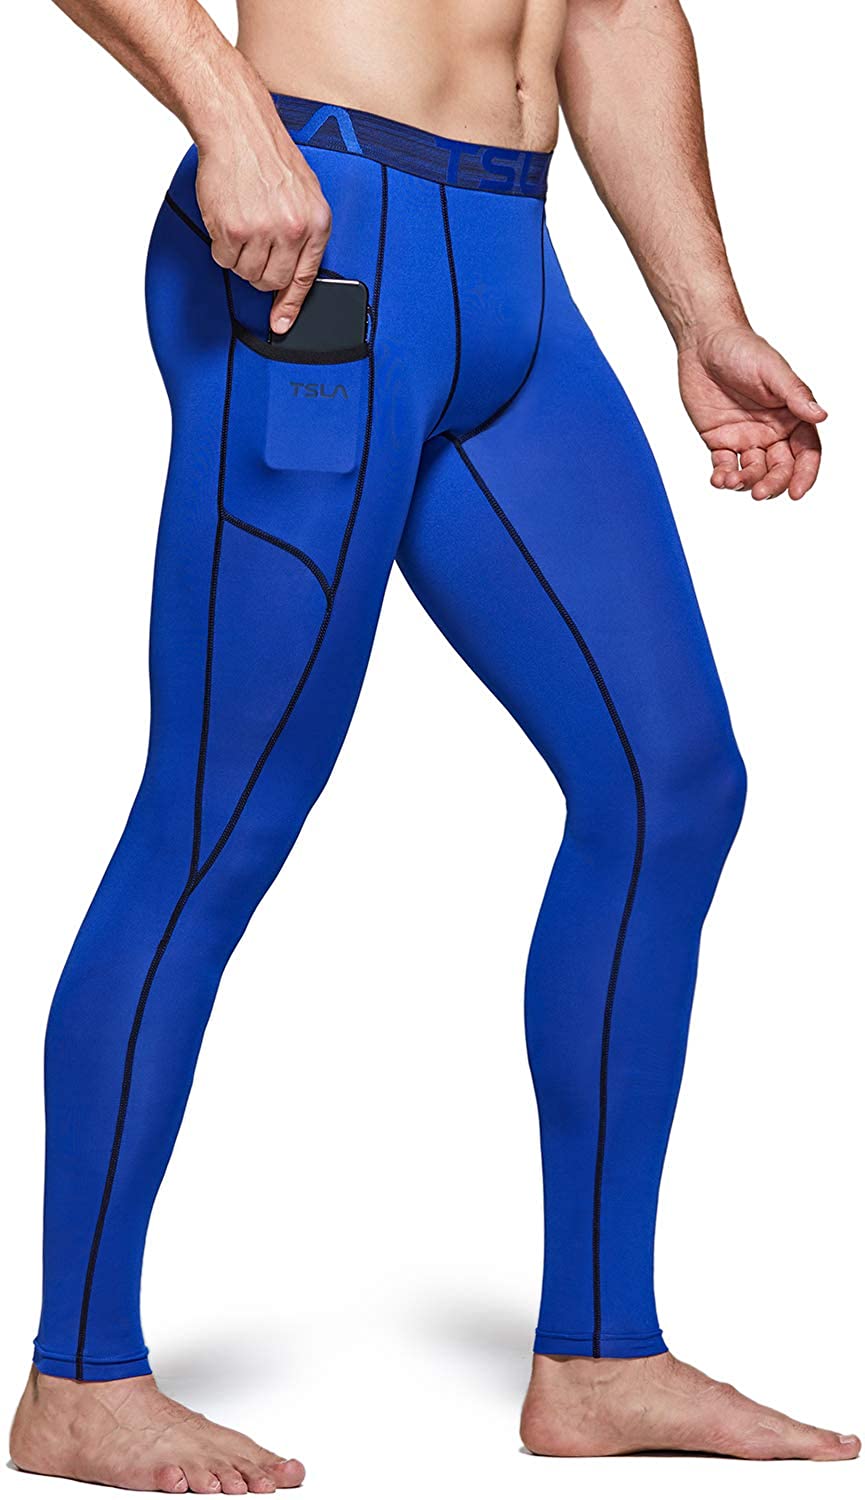 Buy 3 Pack Men's Thermal Compression Pants, Athletic Running